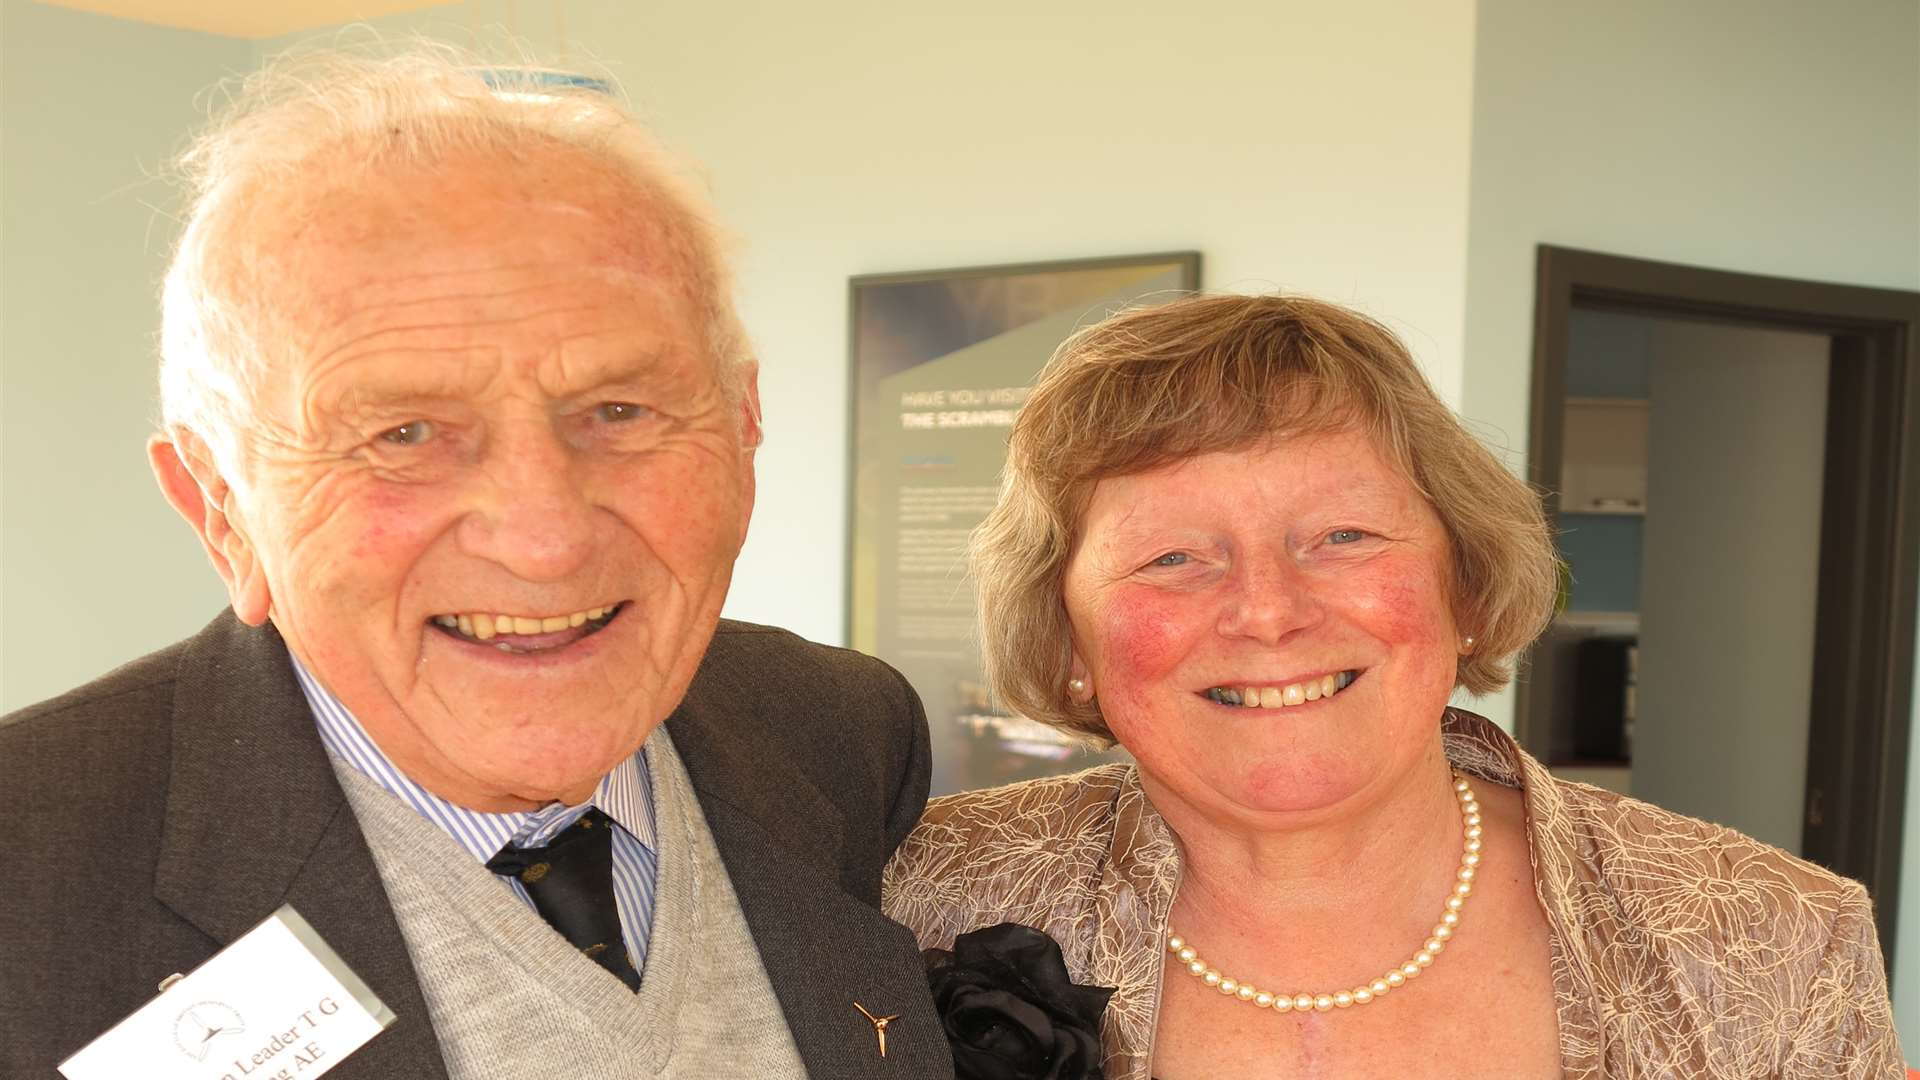 Tony Pickering with his wife Chris